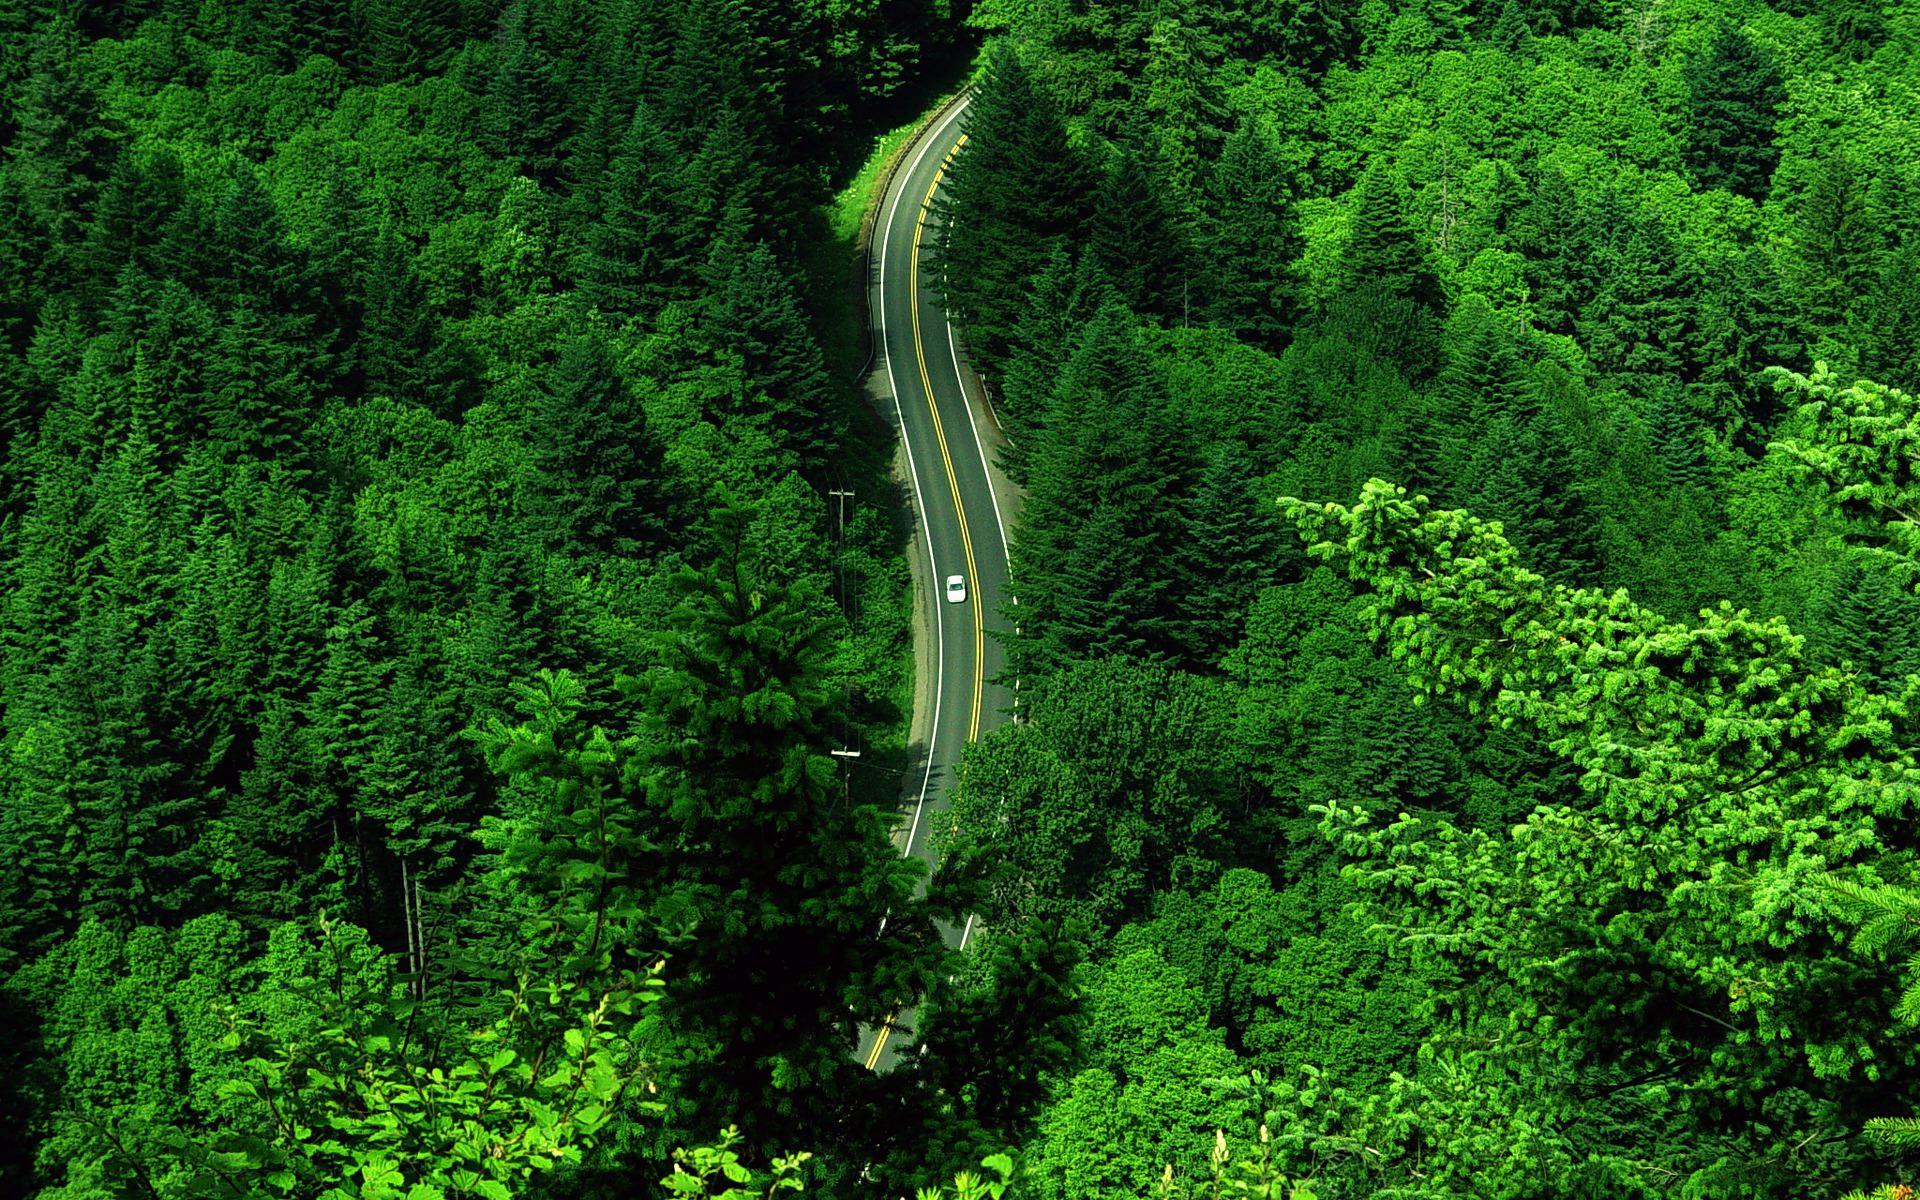 Download wallpaper: highway, road Forest, download photo, greenery